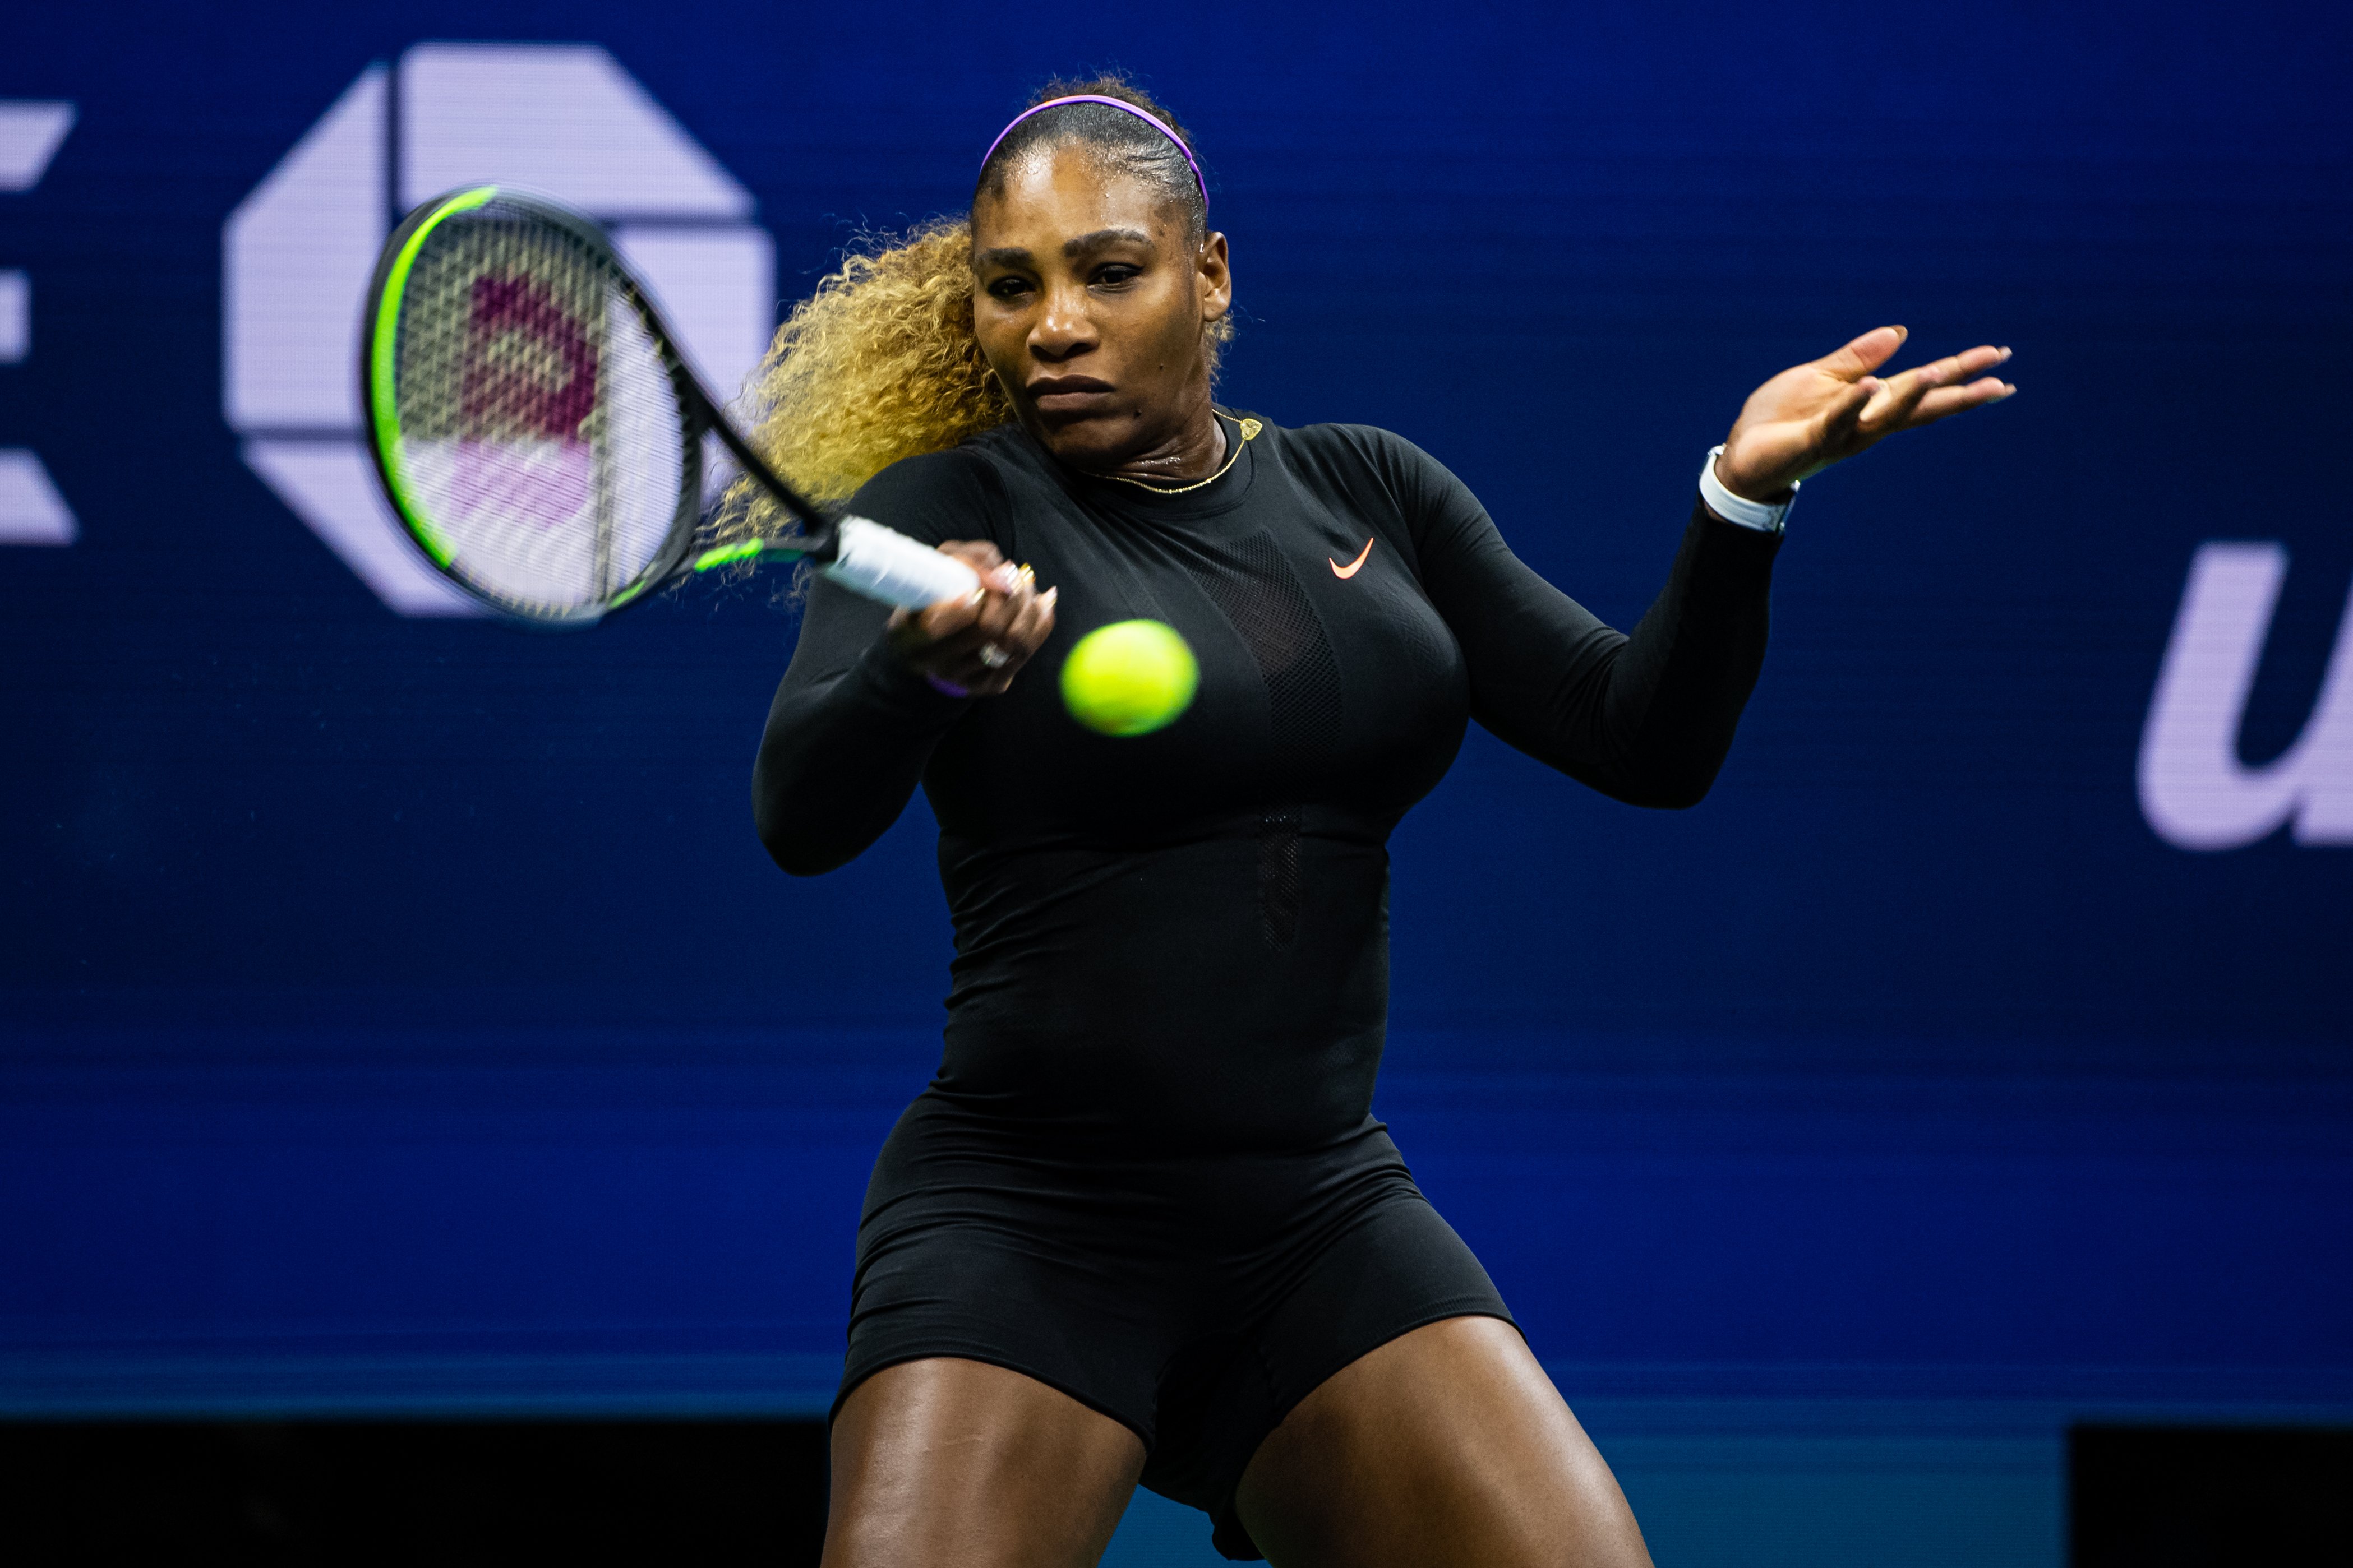 Serena Williams during her tennis match at the 2019 US Open in Queens, New York. | Photo: Getty Images